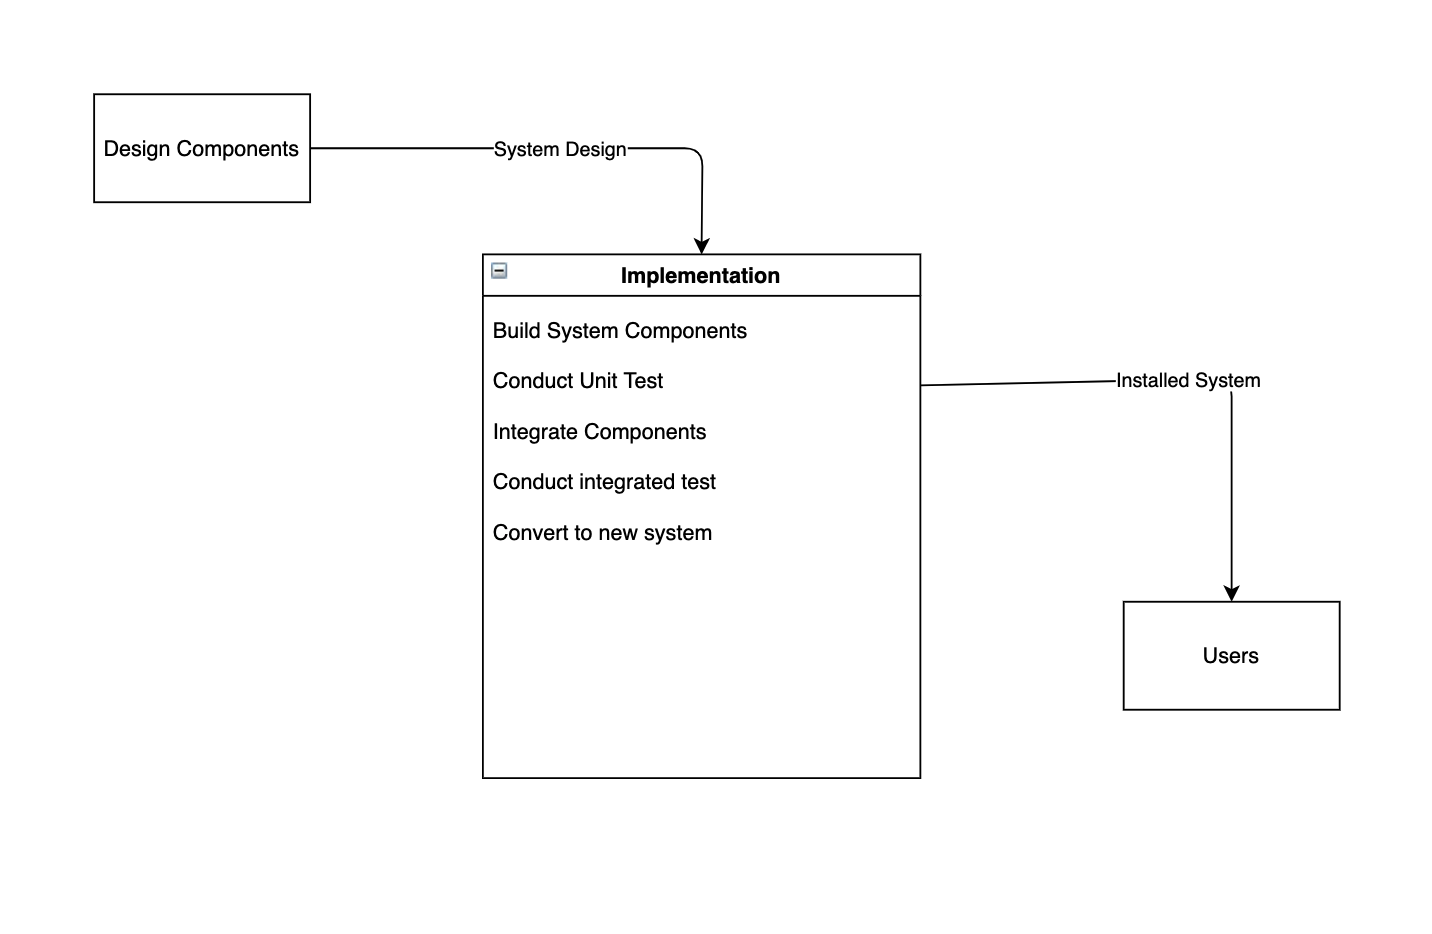 Implentation components flowchart that starts at design components and through system design reaches implentation of the following items: Build System Components, Conduct Unit Test, Integrate Components, Conducted integrated test, conver to new system. Through the system being installed it reaches users.